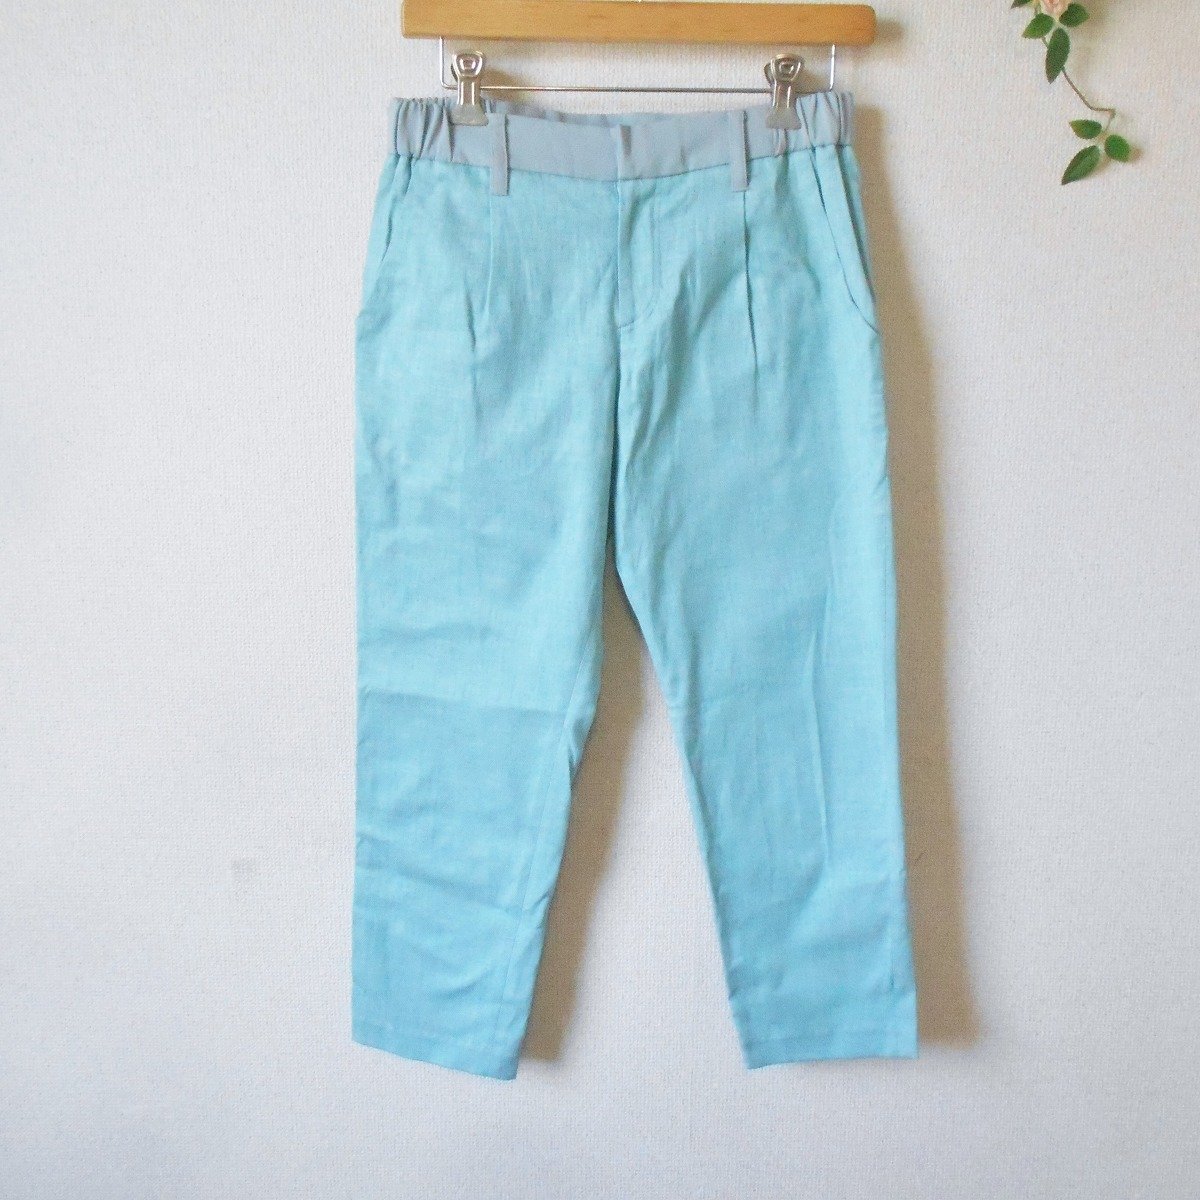 meto Lee zeMAITRESSE cropped pants 9 lady's 8 minute height spring summer 